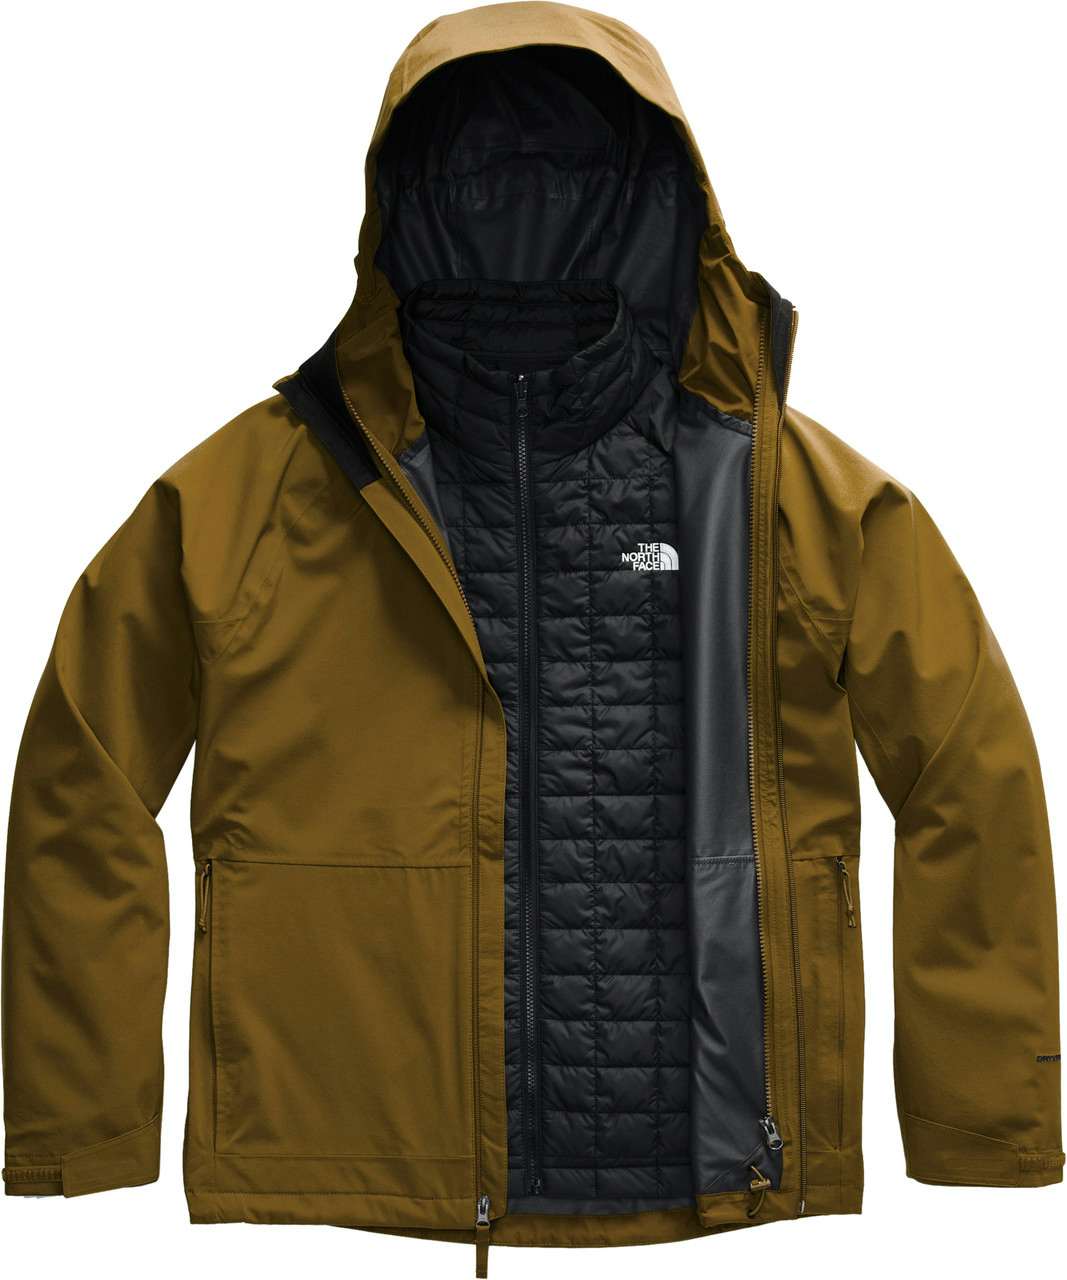 Manteau ThermoBall Eco Triclimate Vert sapin/Noir TNF